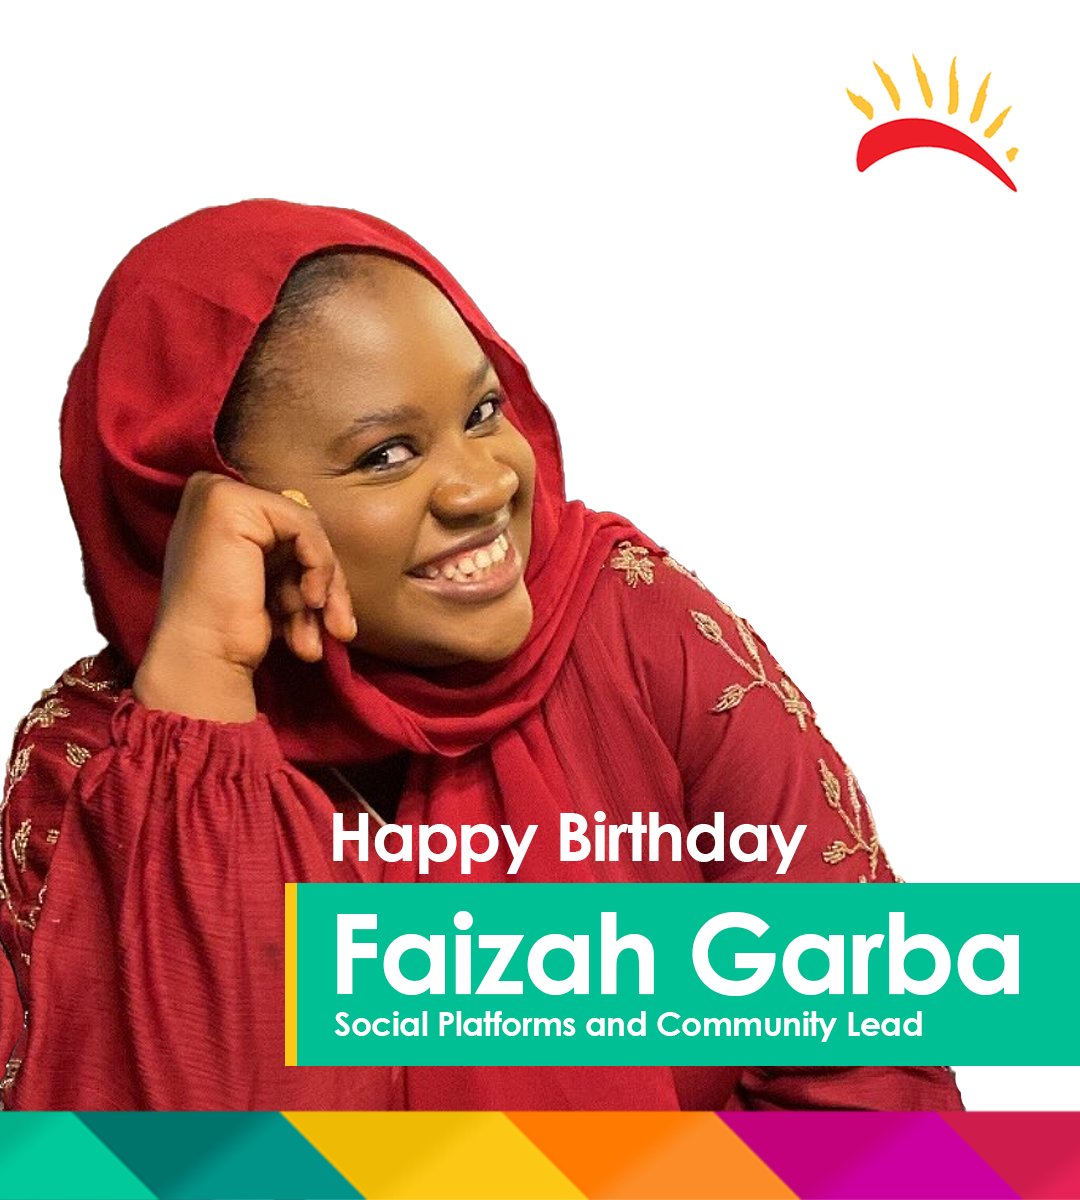 Happy Birthday to you Ms. Faizah Garba! @faizah_utc  🥂🎉✨🤗

Your dedication and support are truly valued. We Wishing you a new year filled with joy, success, and blessings. May this celebration truly bring you endless opportunities and happiness. 

#Birthday #Event #Dbegotin